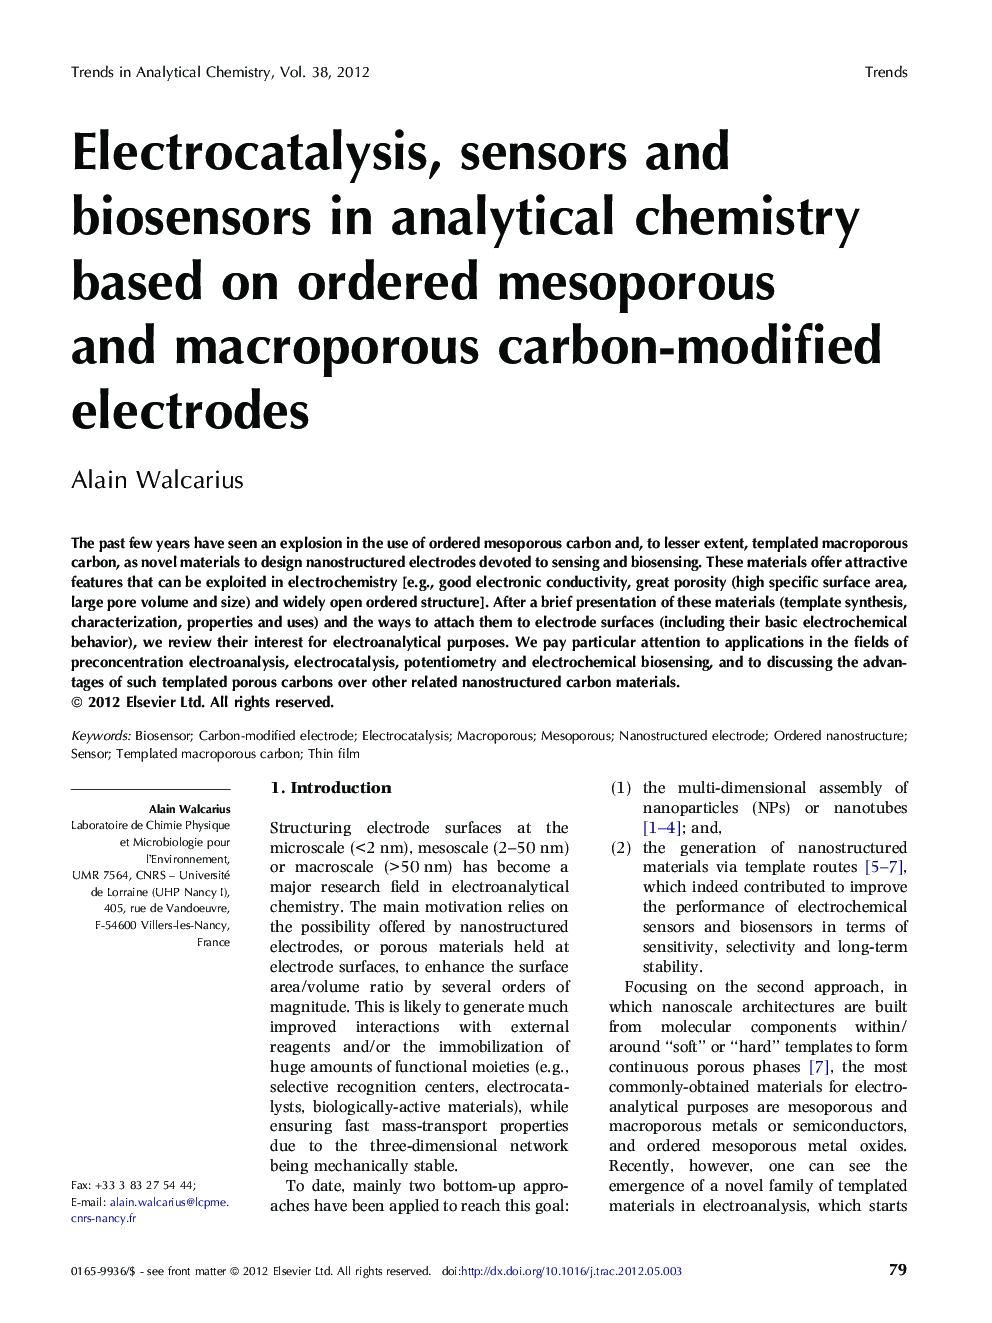 Electrocatalysis, sensors and biosensors in analytical chemistry based on ordered mesoporous and macroporous carbon-modified electrodes